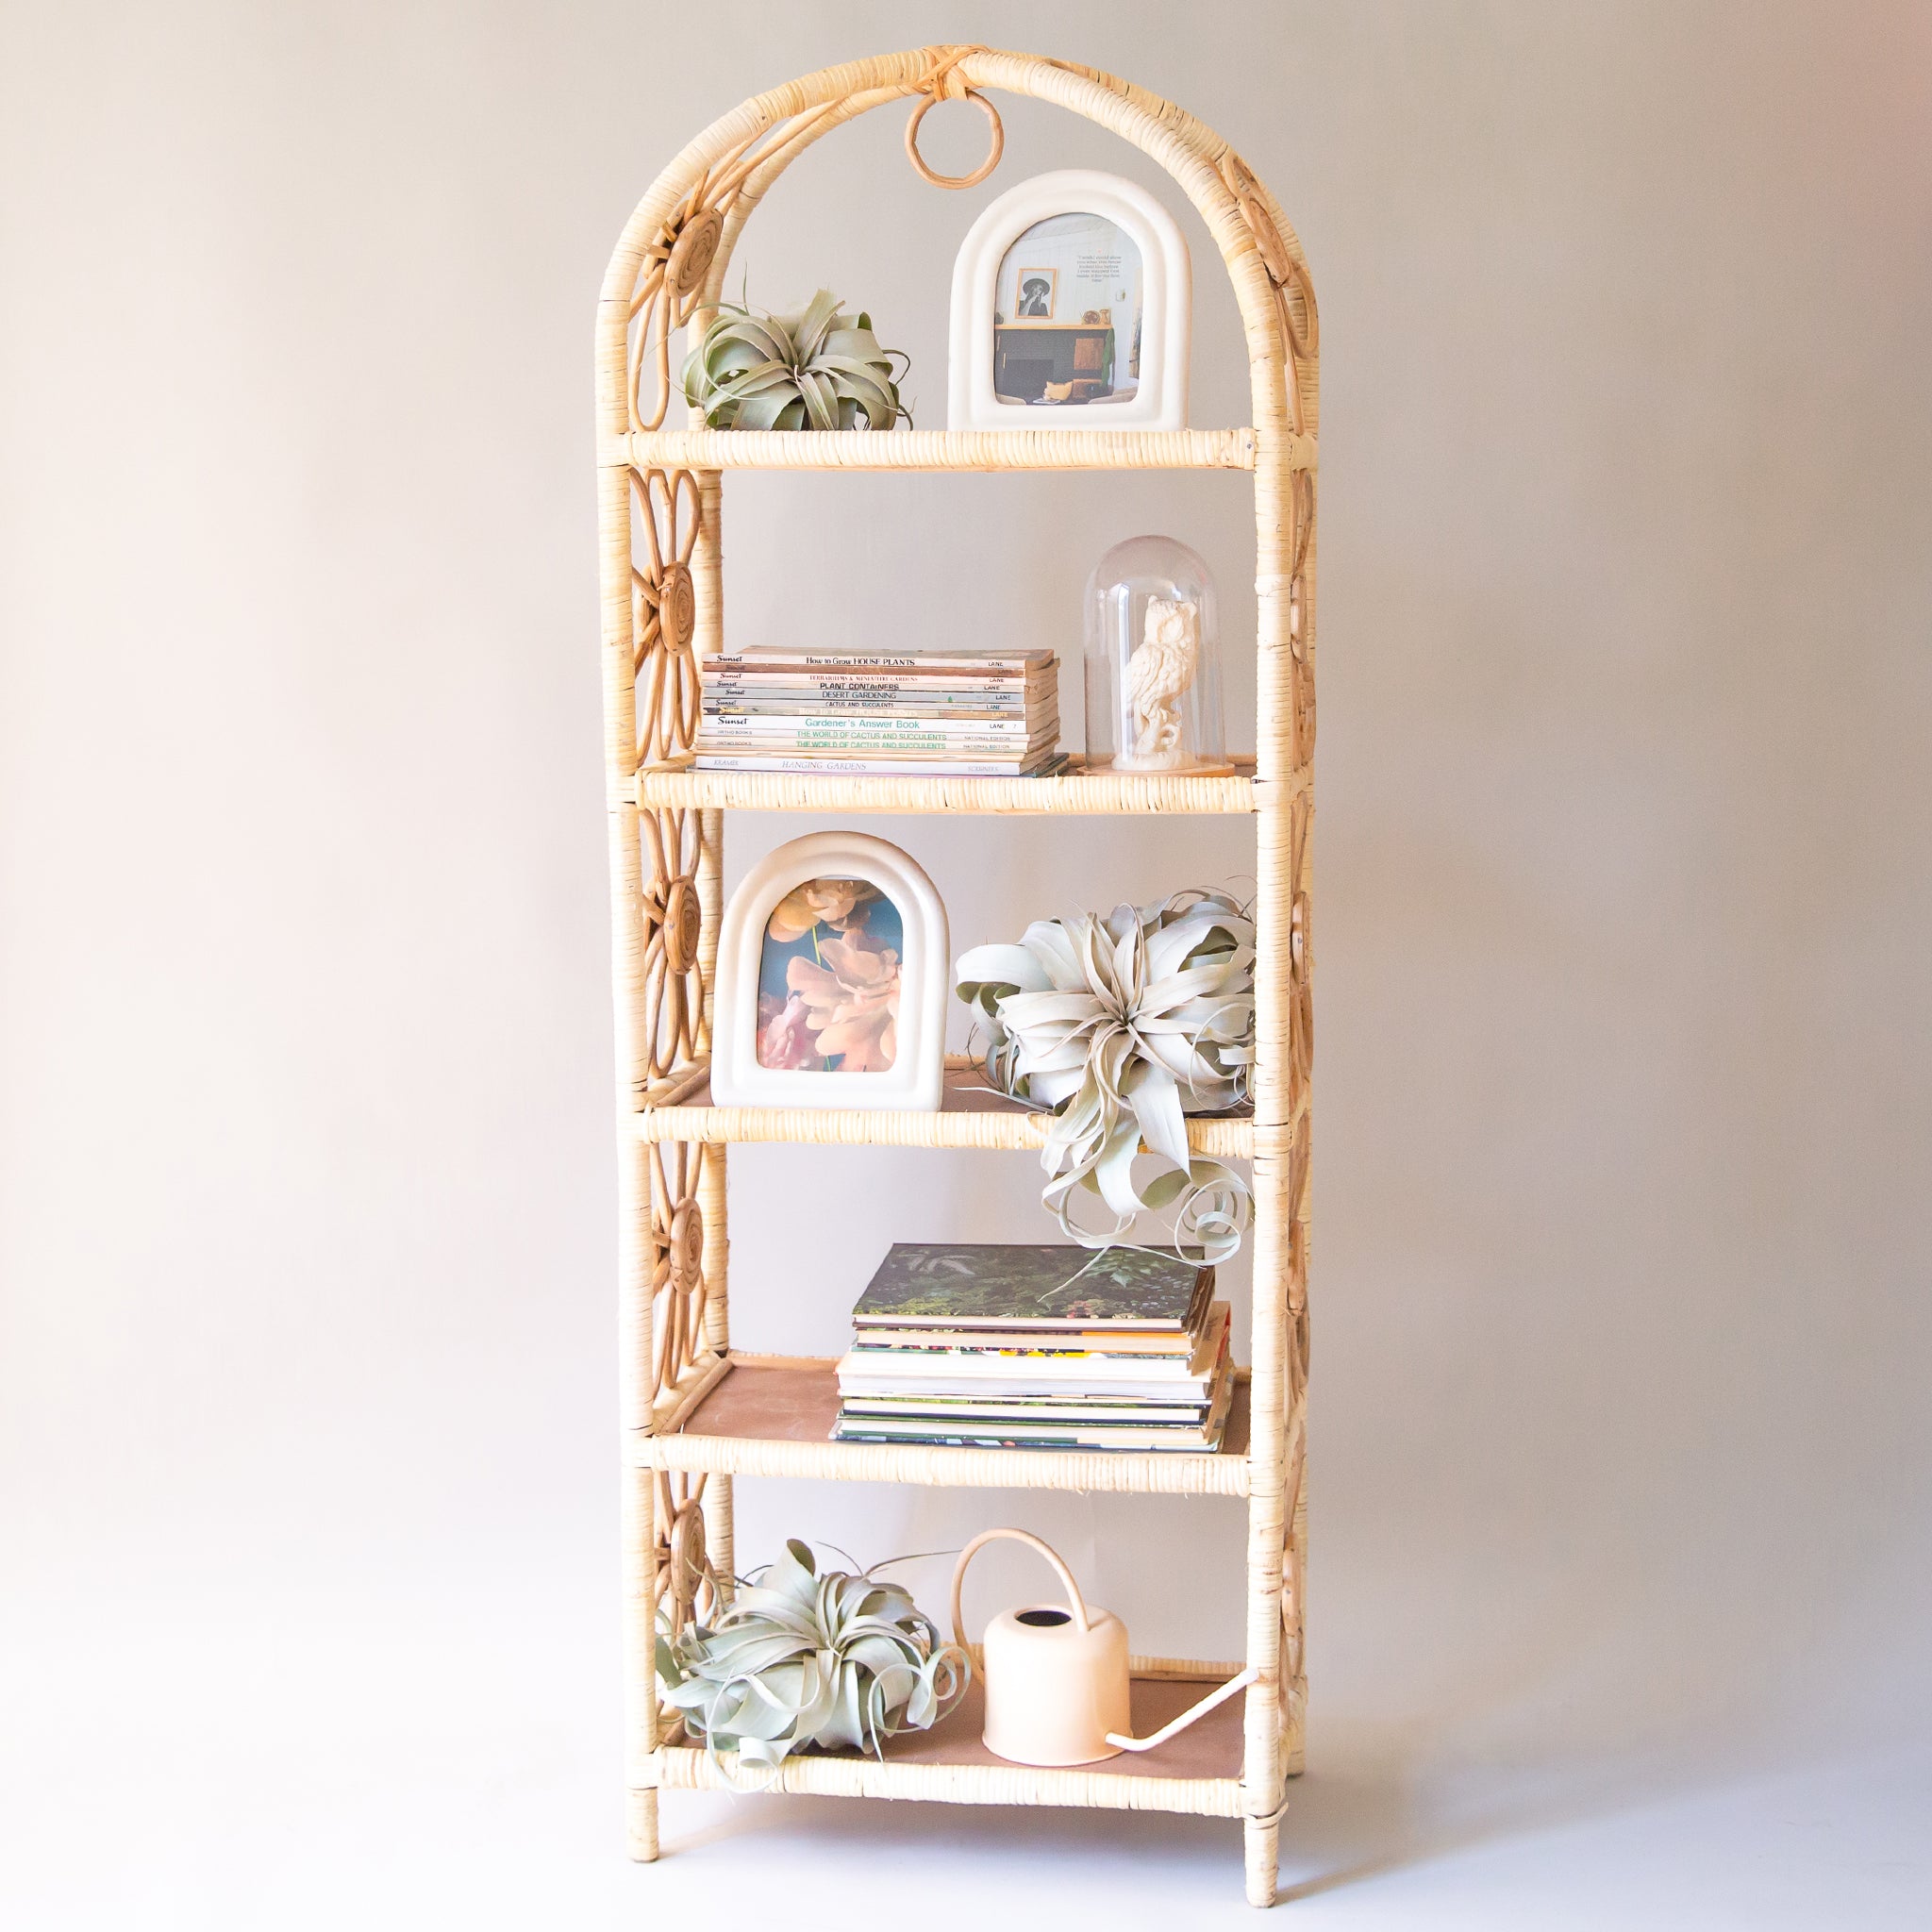 The large version of the shelf. Natural woven rattan shelf with daisy accents on both sides. The sides are open and let in ample light to keep the shelves well lit. Each shelf is covered in rattan and has a chocolate brown bottom.